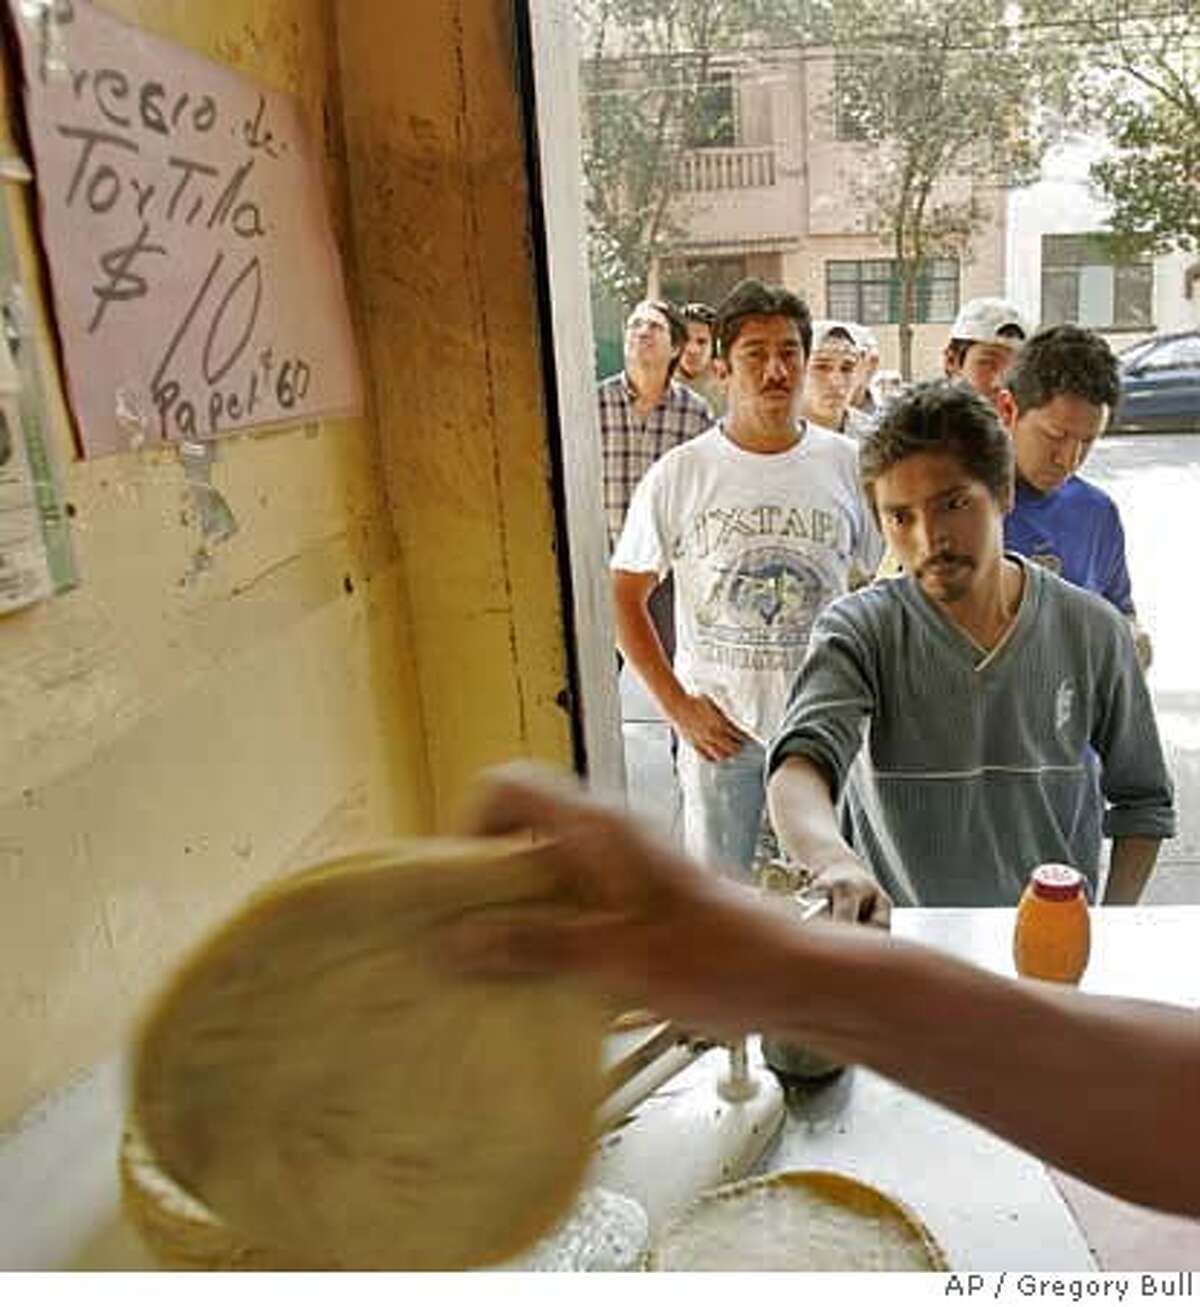 Men wait for tortillas at a tortilla shop in Mexico City, Mexico, Wednesday, Jan. 10, 2007. Tortillas, one of Mexico's most closely regulated commodities, rose in price this month, from seven to ten pesos for one kilo. (AP Photo/Gregory Bull) TO GO WITH STORY ON TORTILLA PRICES BY PETER ORSI EFE OUT